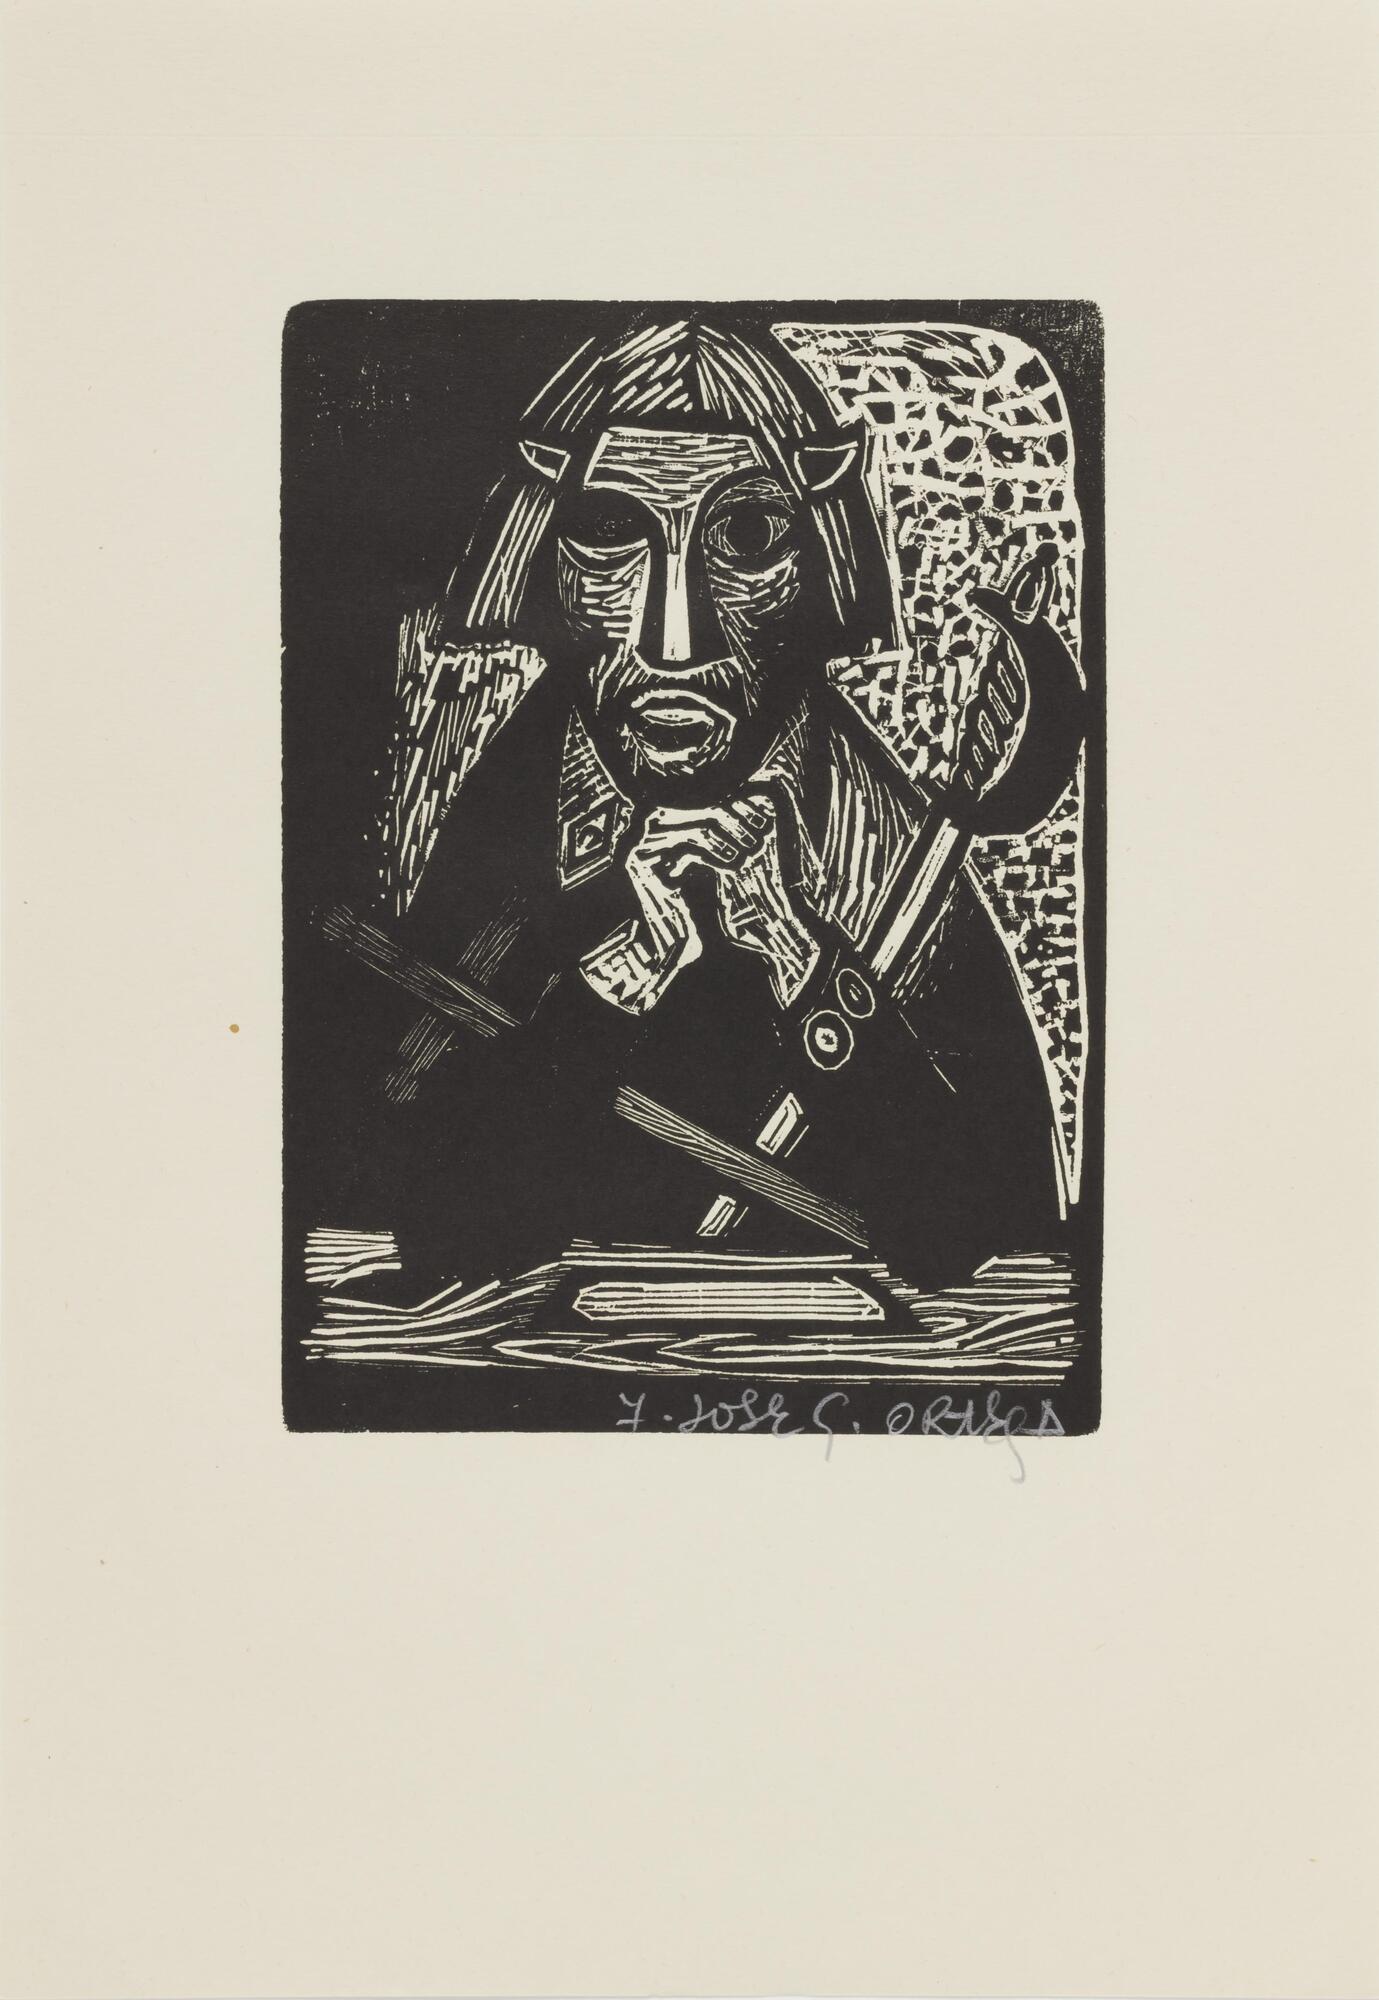 This woodblock print is a portrait of a man with his hands clasped below his chin. Two horns protrude from his forhead, a sword is angled across his body, showing the hilt. The print is signed (l.c.) "7 Pepe Ortega" in pencil.